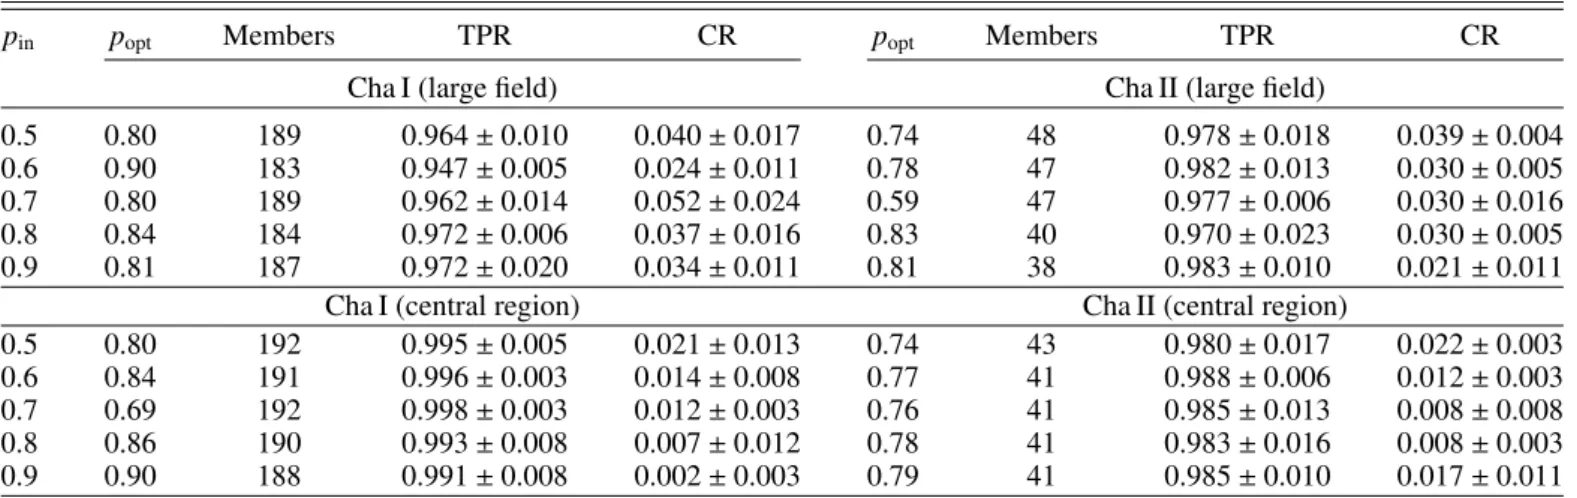 Table 1. Comparison of membership results in Cha I and Cha II using different values for the probability threshold p in .